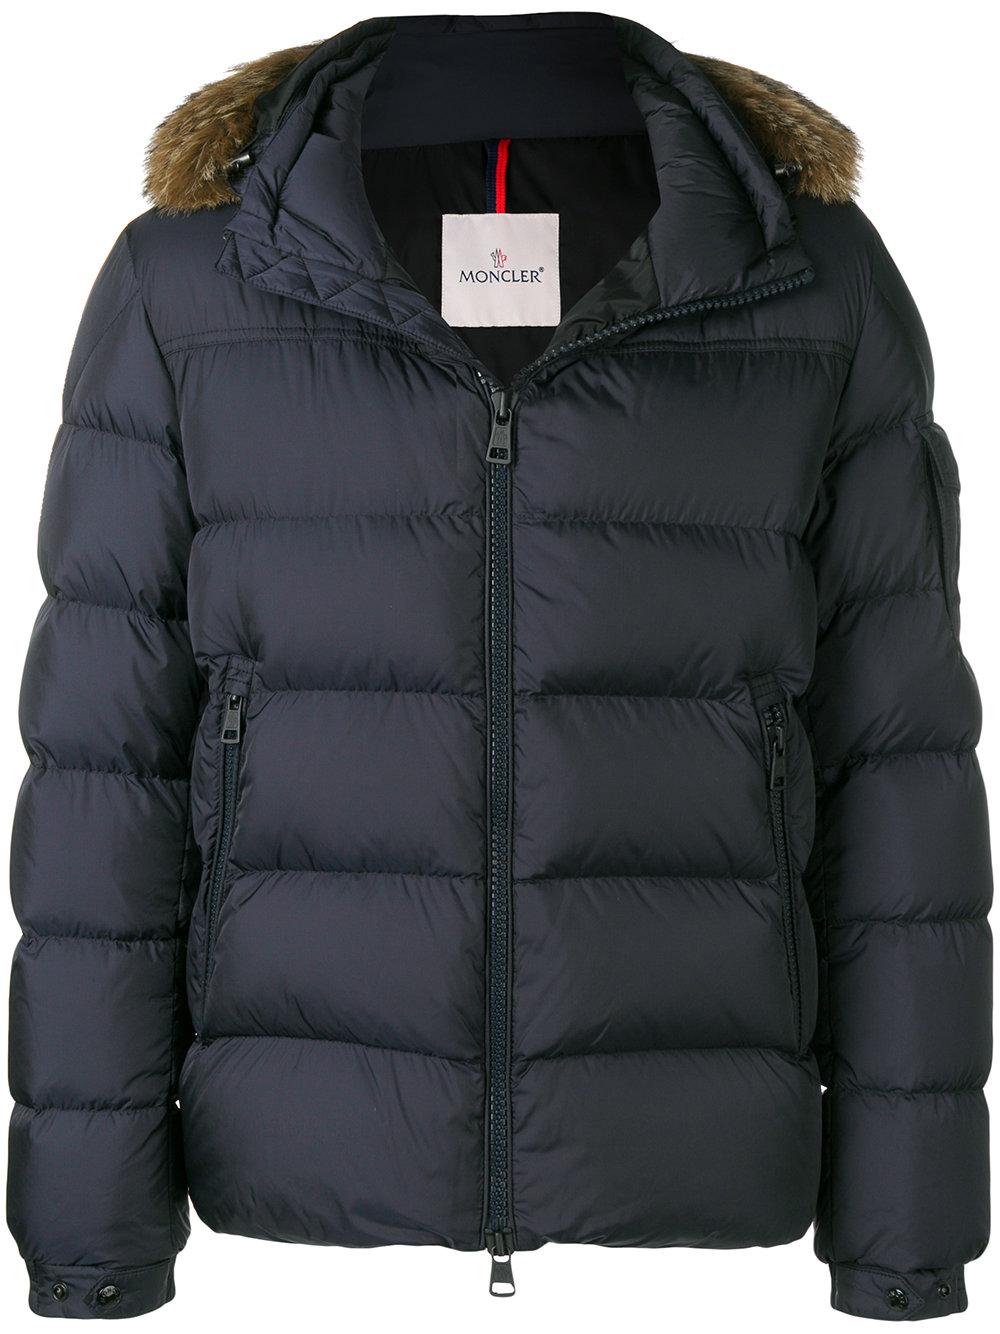 Lyst - Moncler Marque Winter Jacket in Blue for Men